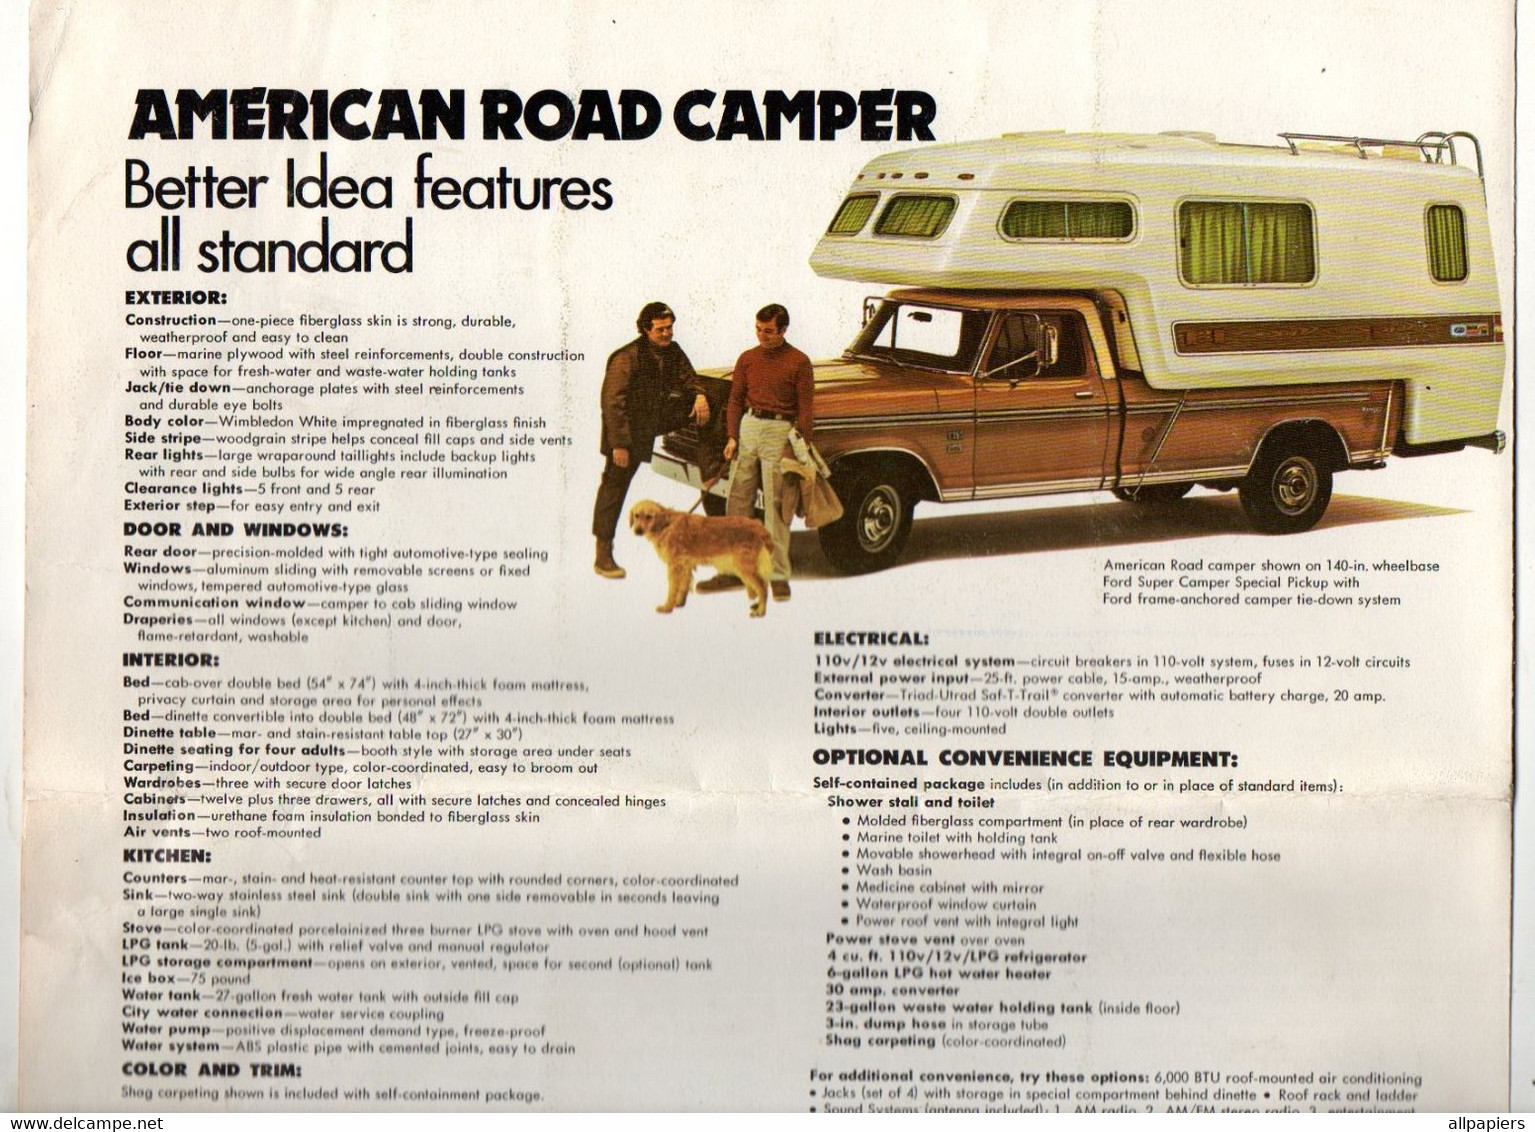 Dépliant Publicitaire Ford's American Road Camper The New Generation Camper Body From Ford De 1973 - Format : 30.5x28 Cm - Estados Unidos